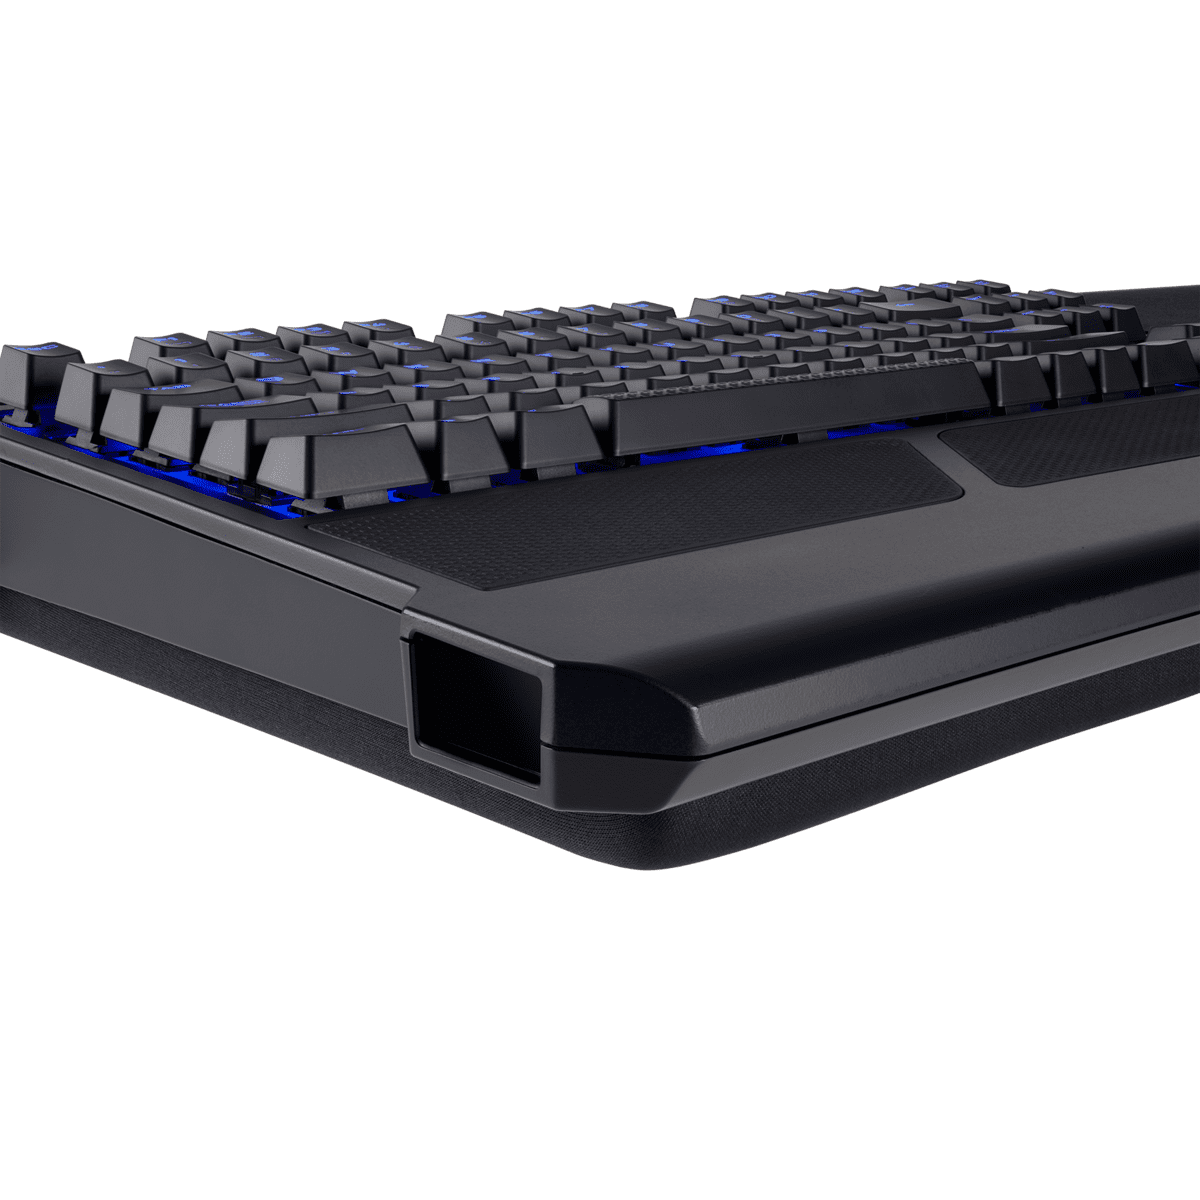 Corsair at CES 2018: Wireless K63 Mechanical Keyboard with Accompanying Lap  Board